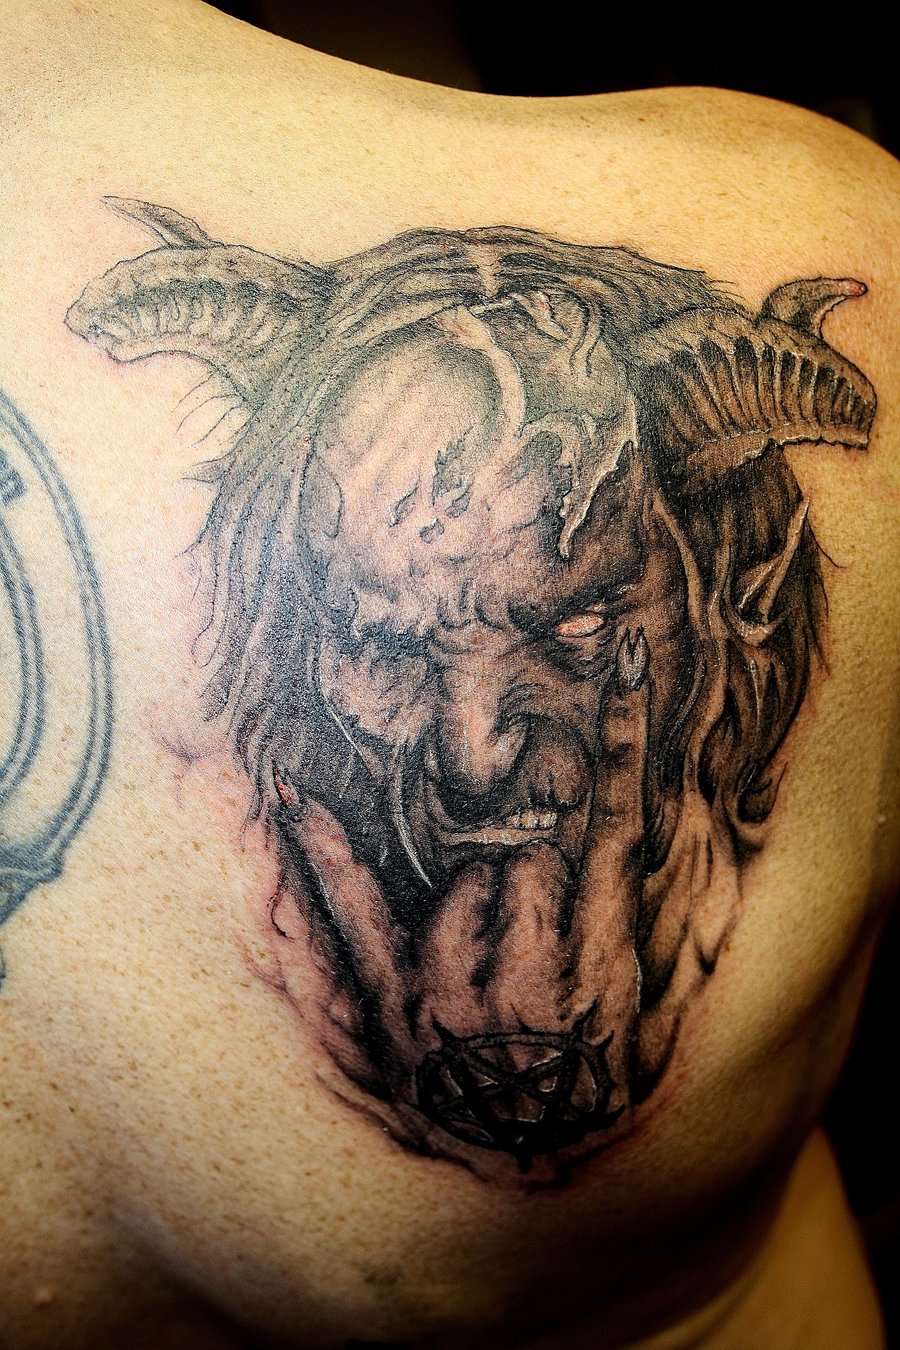 Demon Tattoos Designs, Ideas and Meaning